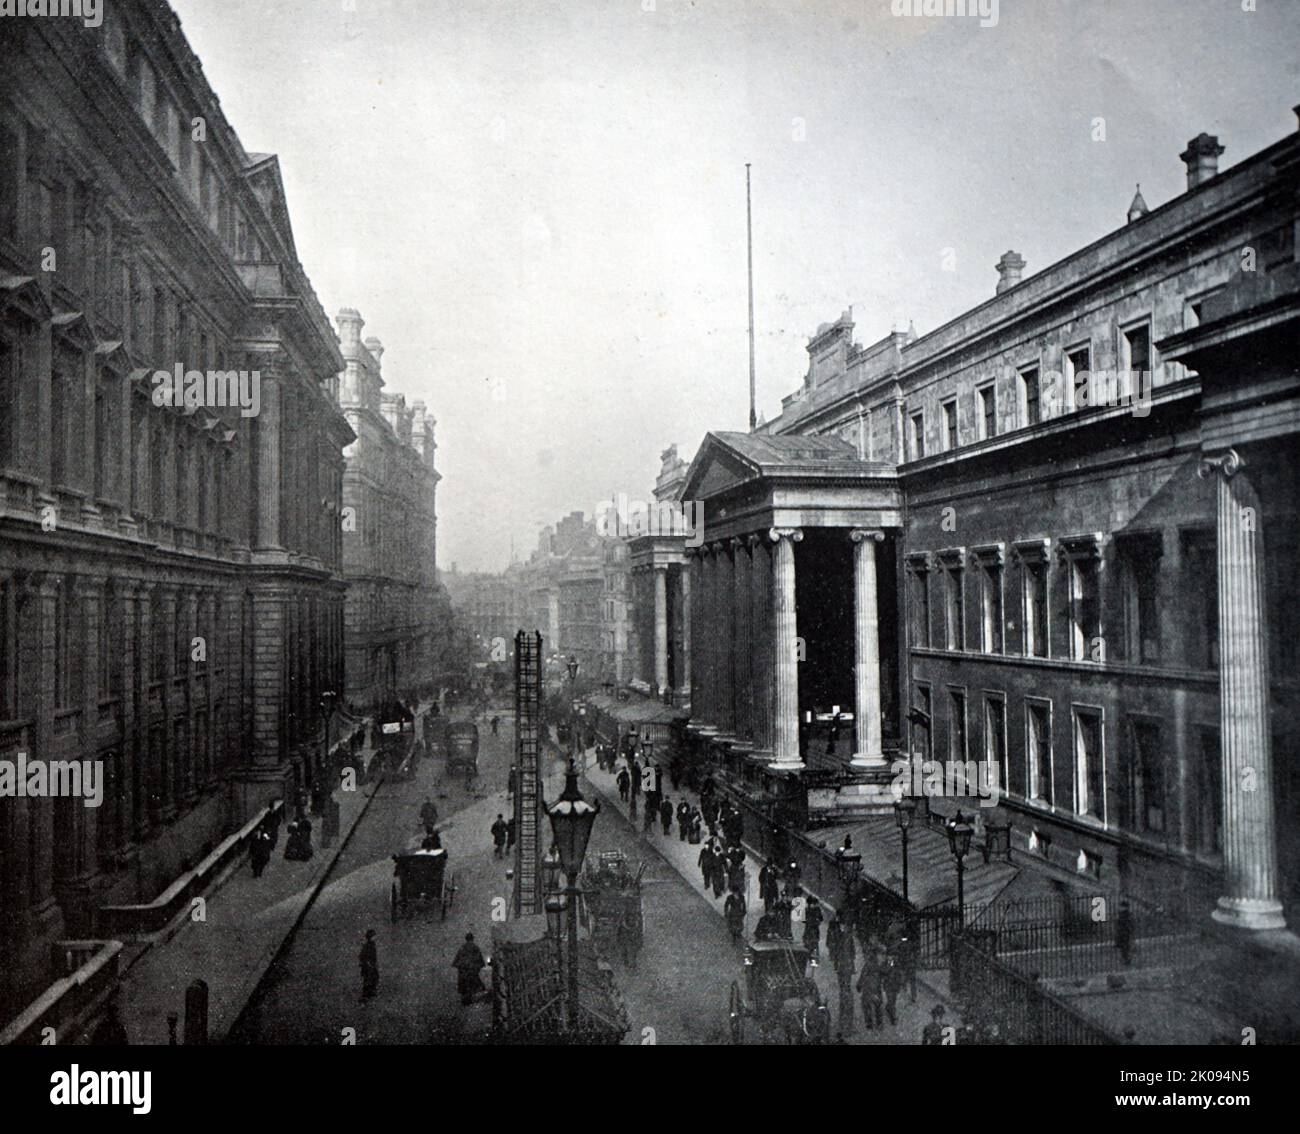 The General Post Office in St. Martin's Le Grand (later known as GPO East) was the main post office for London between 1829 and 1910, the headquarters of the General Post Office of the United Kingdom of Great Britain and Ireland, and England's first purpose-built post office. It was demolished in 1912. Stock Photo